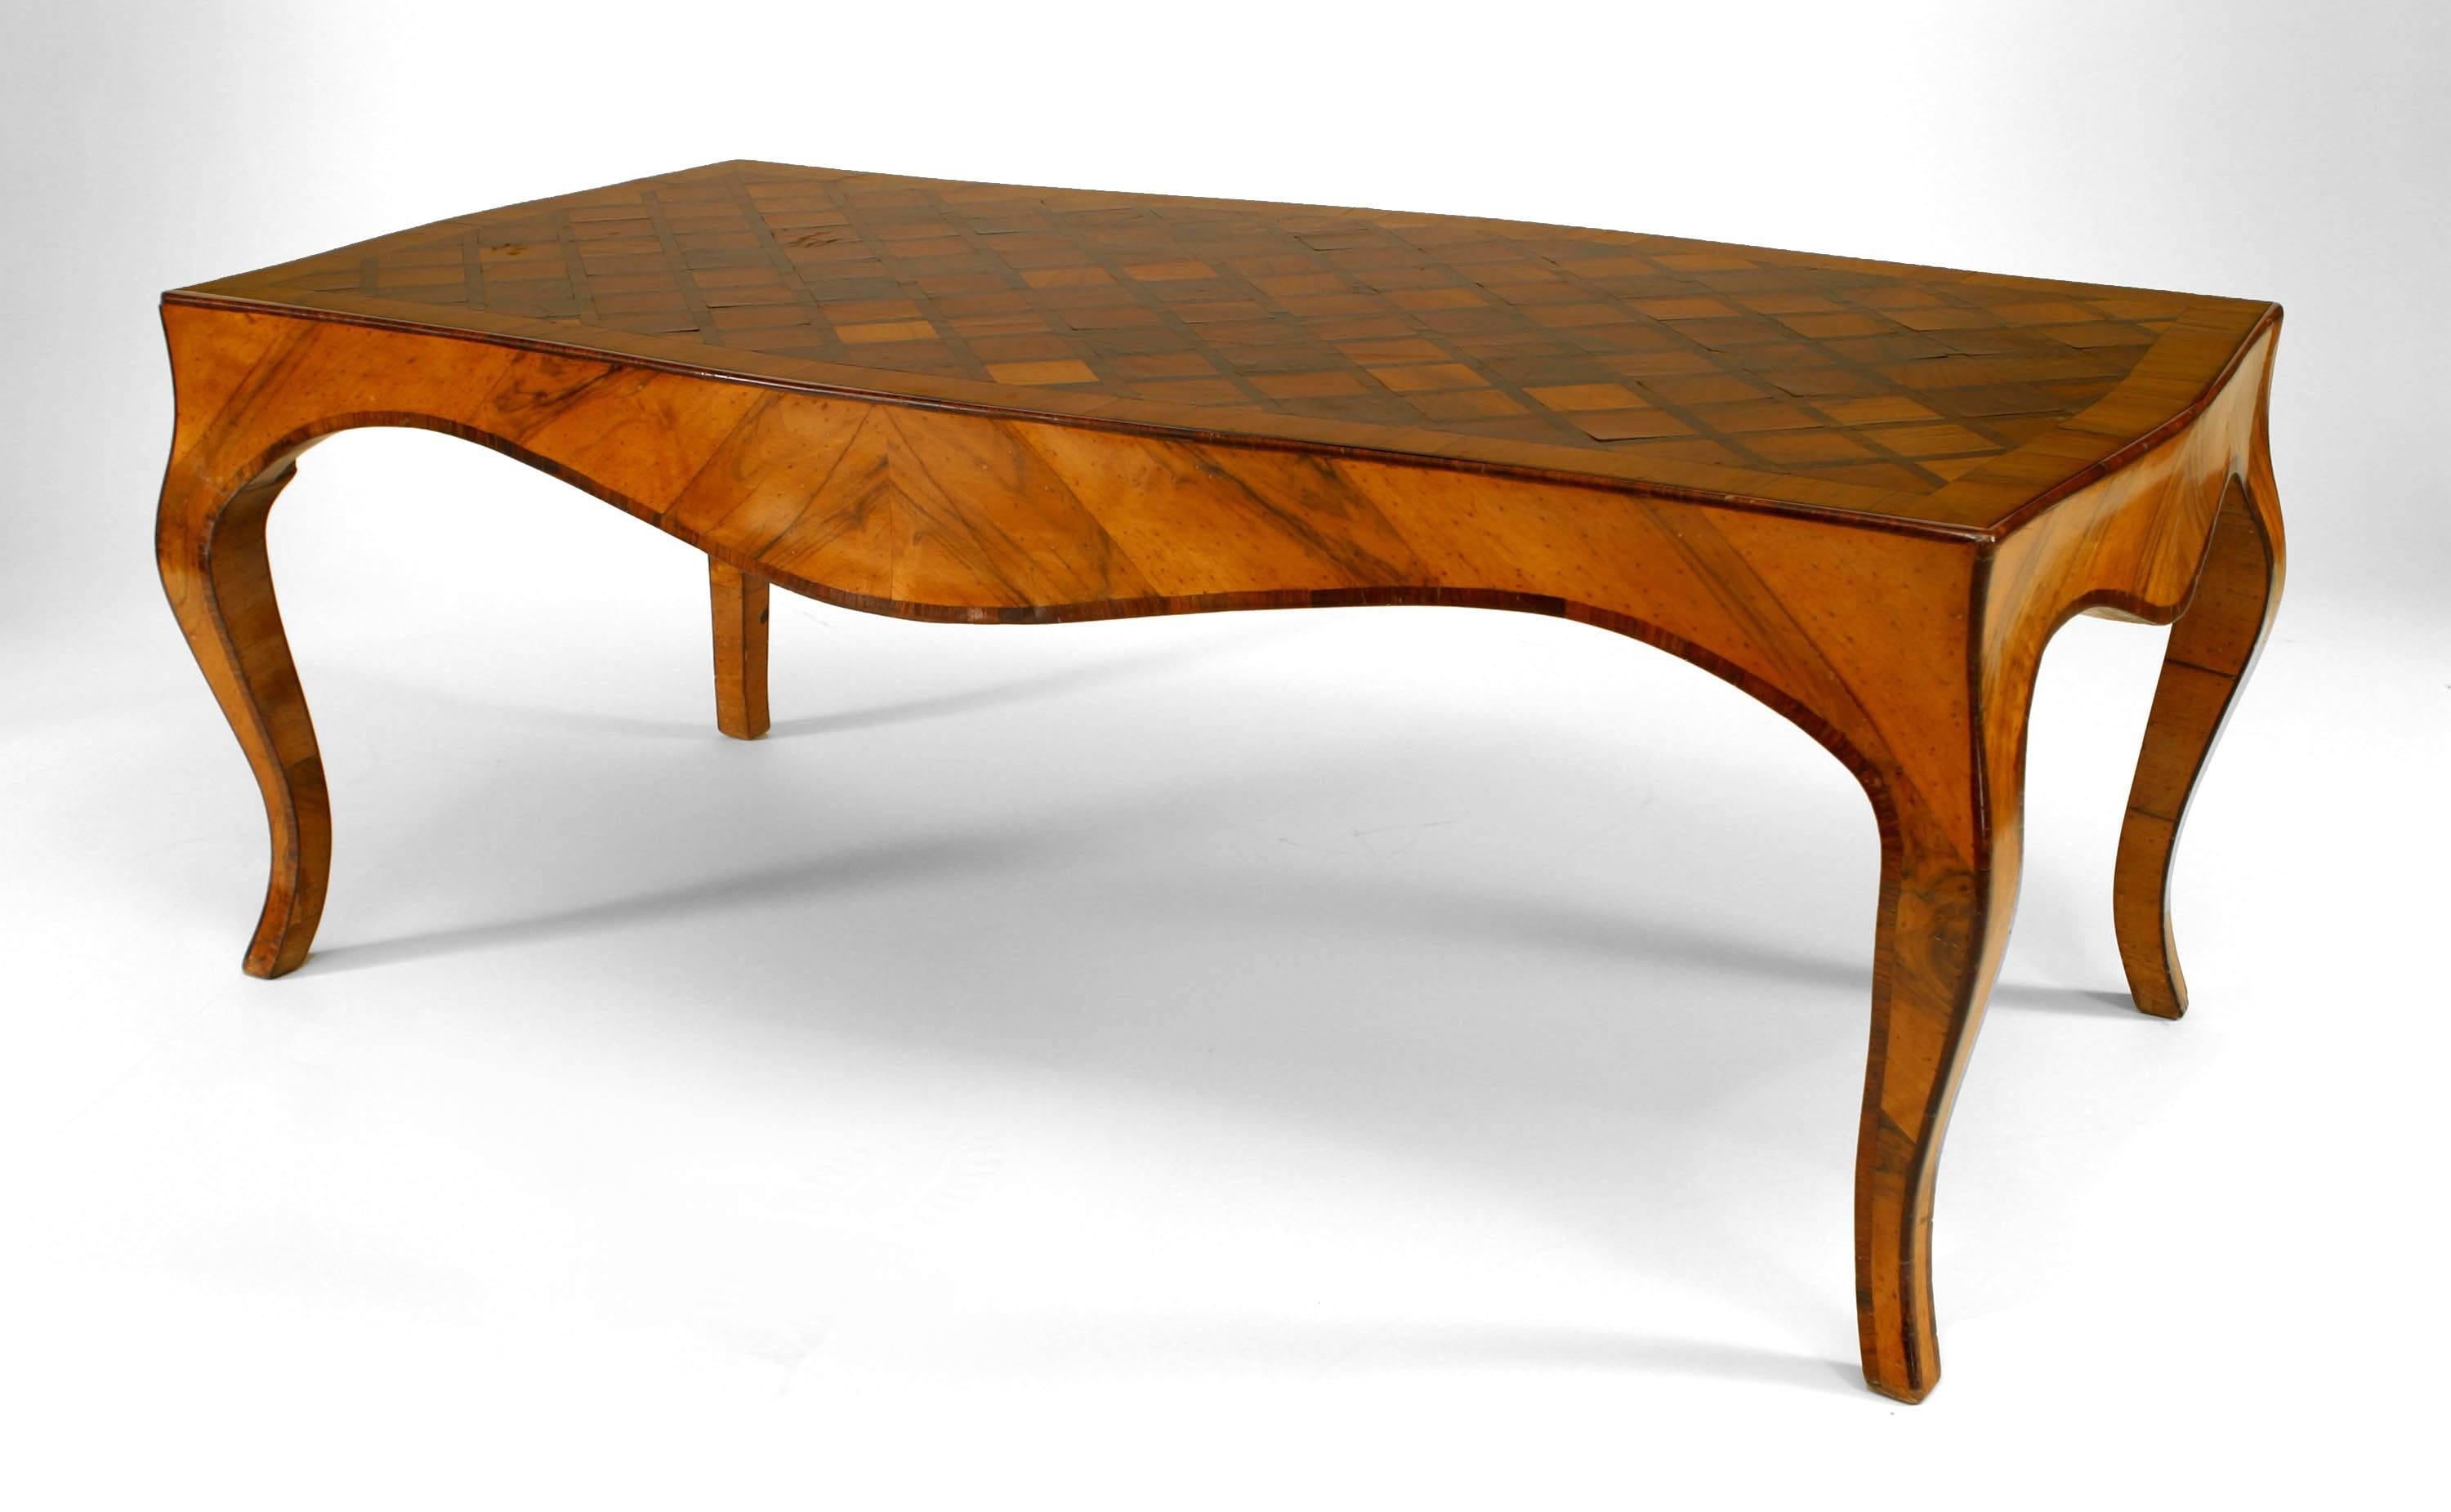 French Louis XV-style (20th Century) walnut and fruitwood coffee table with a shaped top inlaid with a parquetry design of squares.
